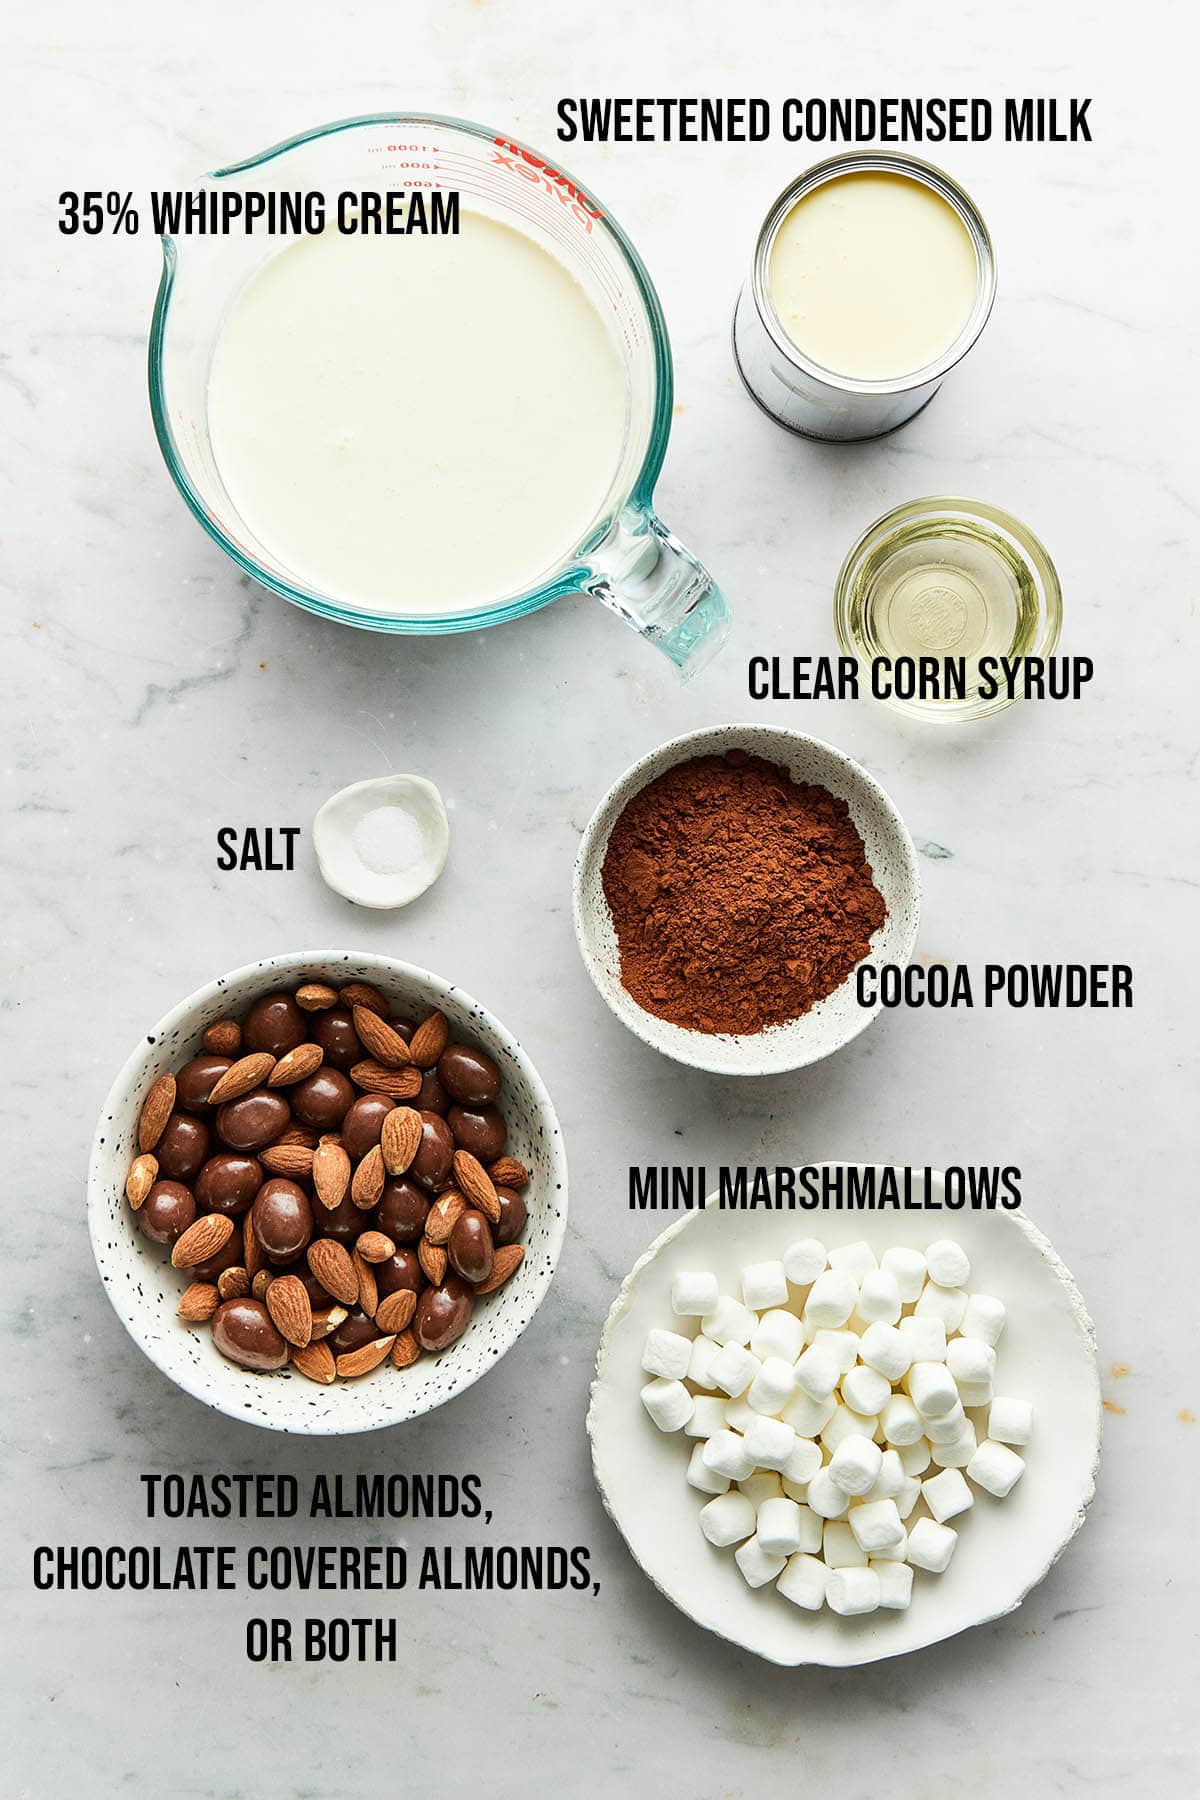 Ingredients to make rocky road ice cream.